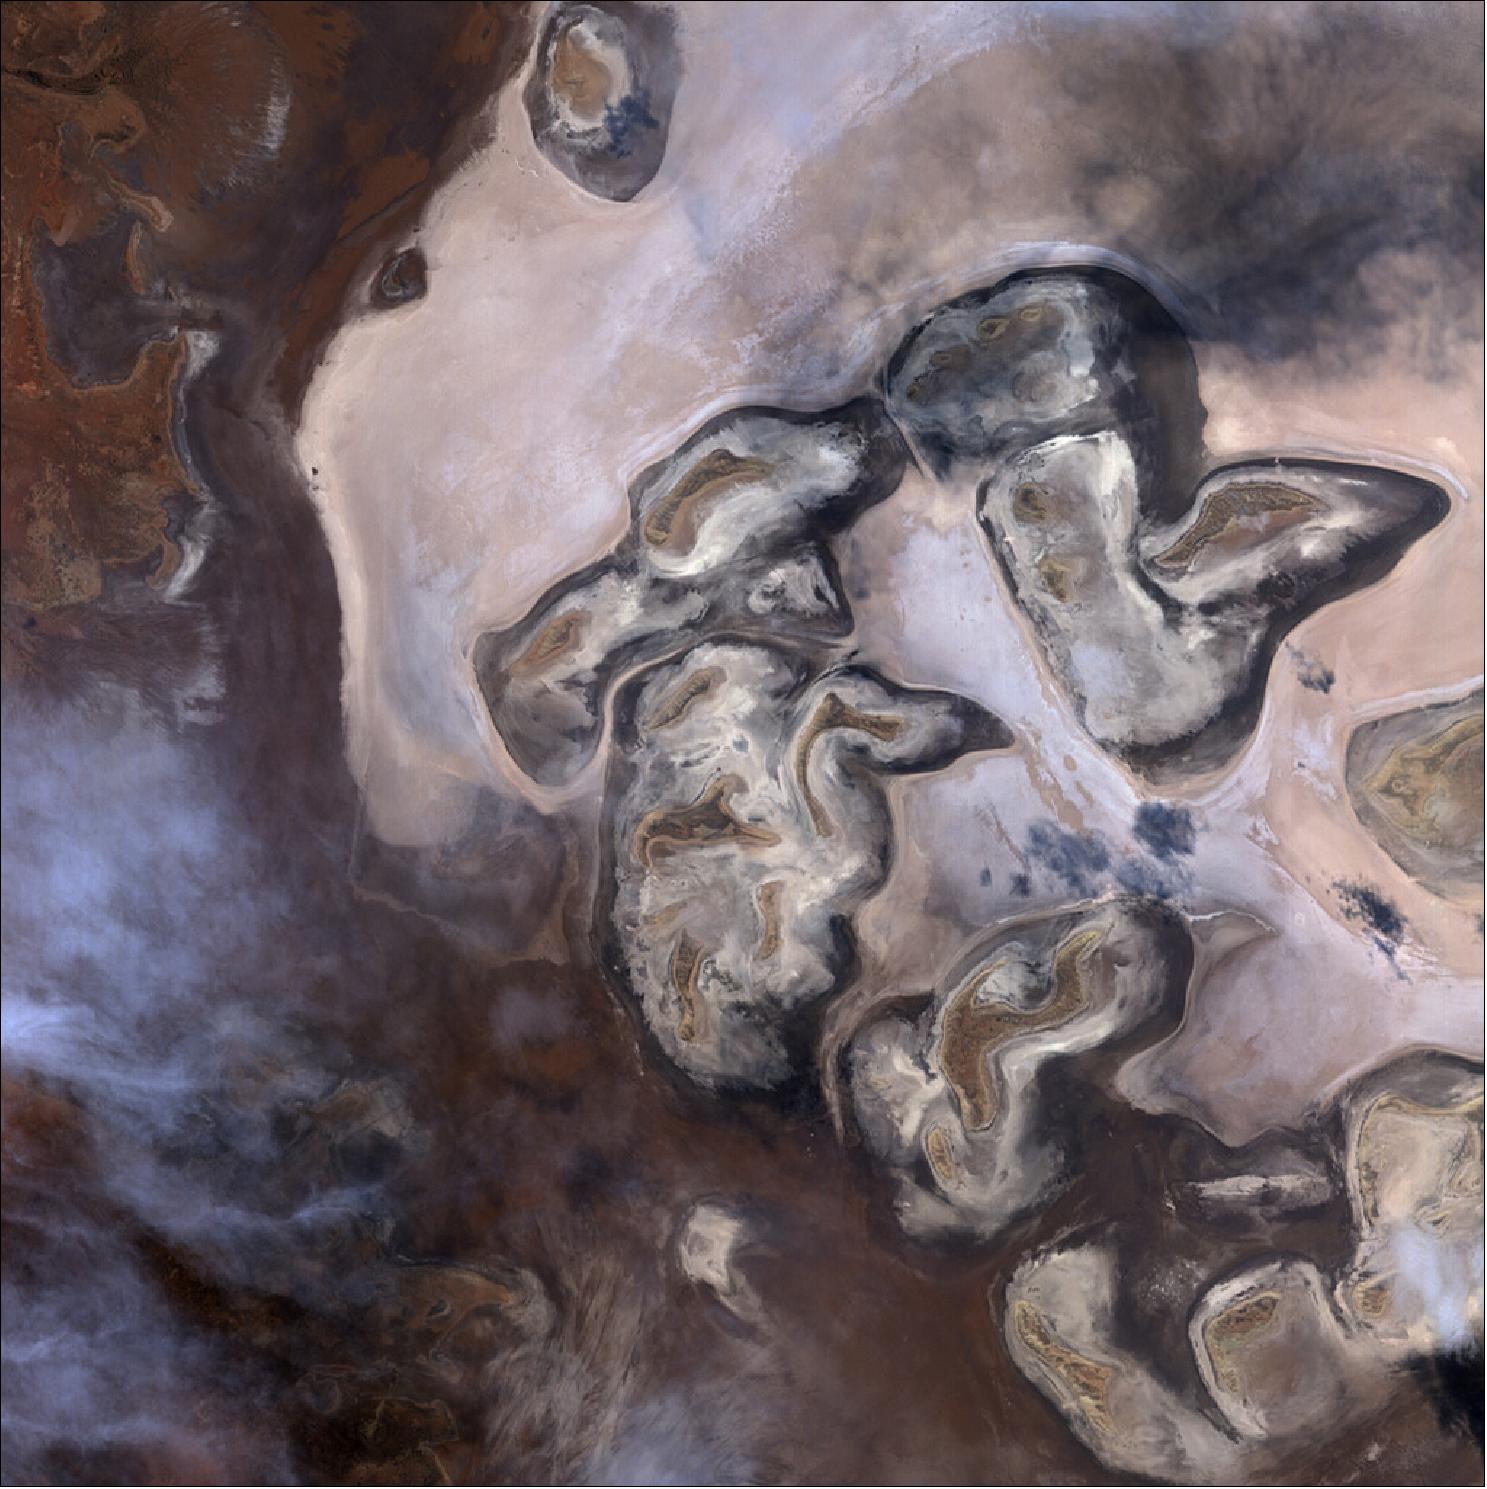 Figure 21: DESIS image of Lake Frome, a salt lake in South Australia, observed on 22 October 2018, provided in April 2019 (image credit: DLR)